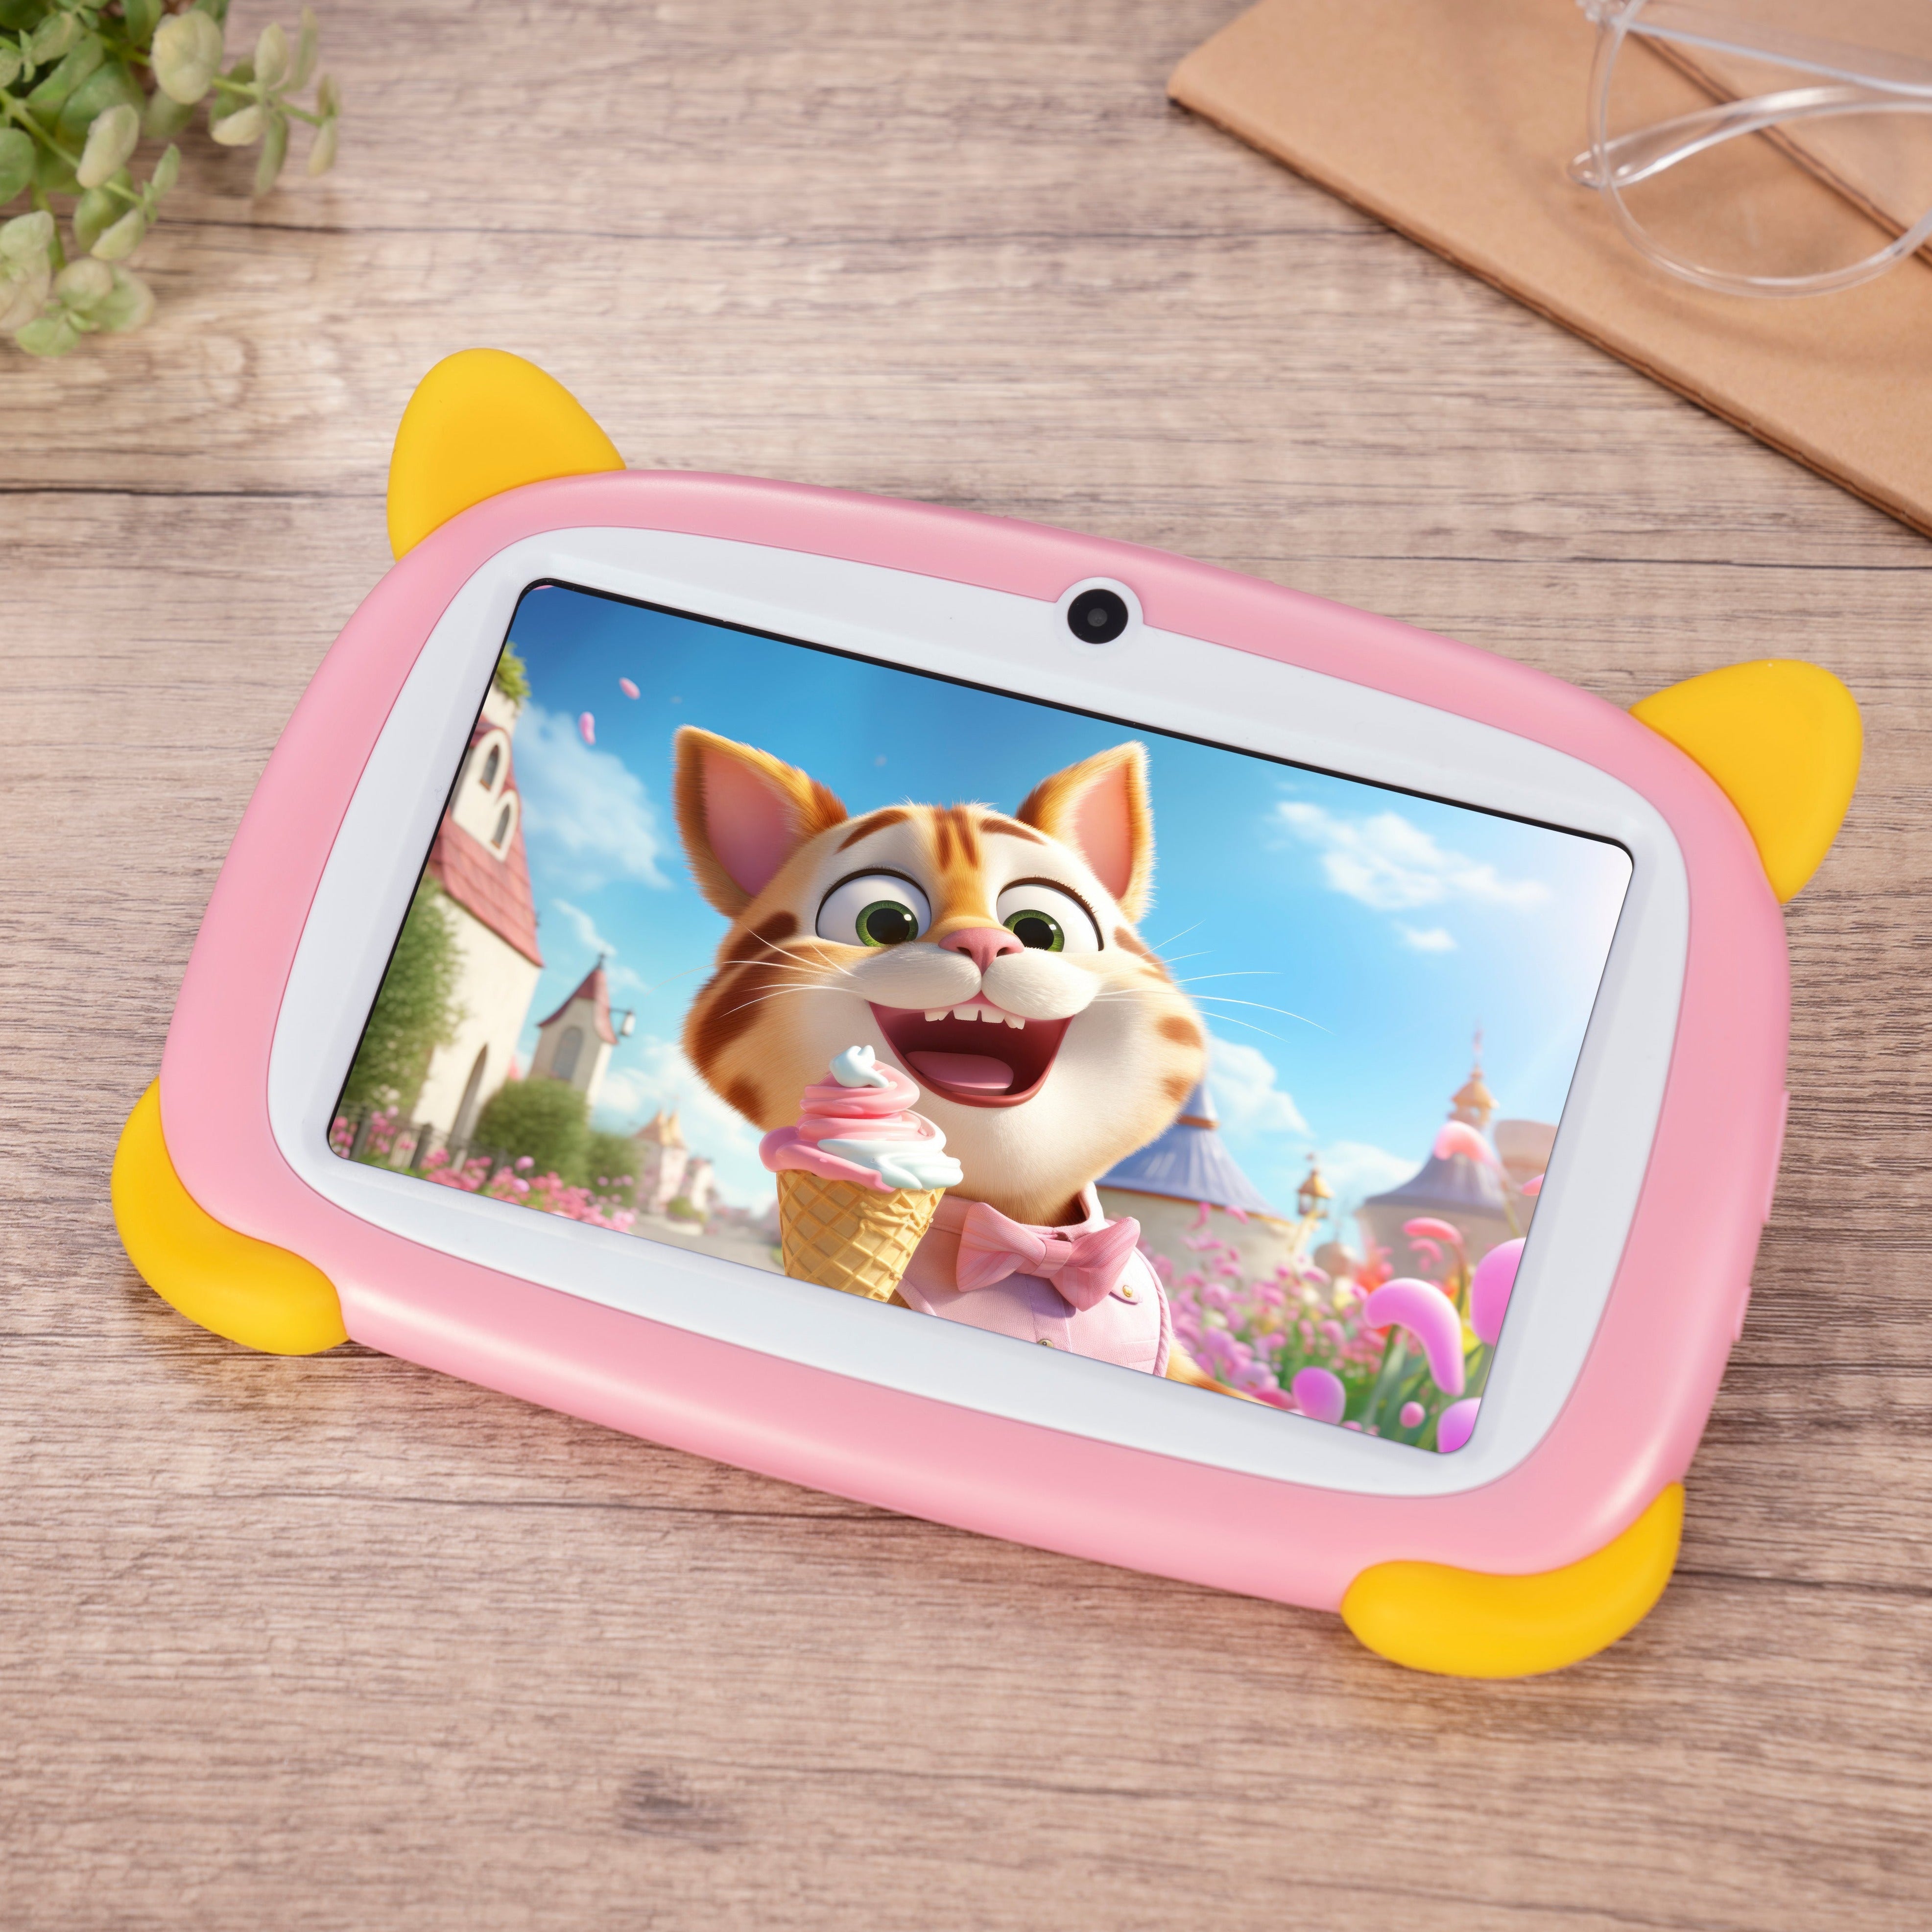 DOOGEE U7 Tablet PC Special Mini Size for Kids